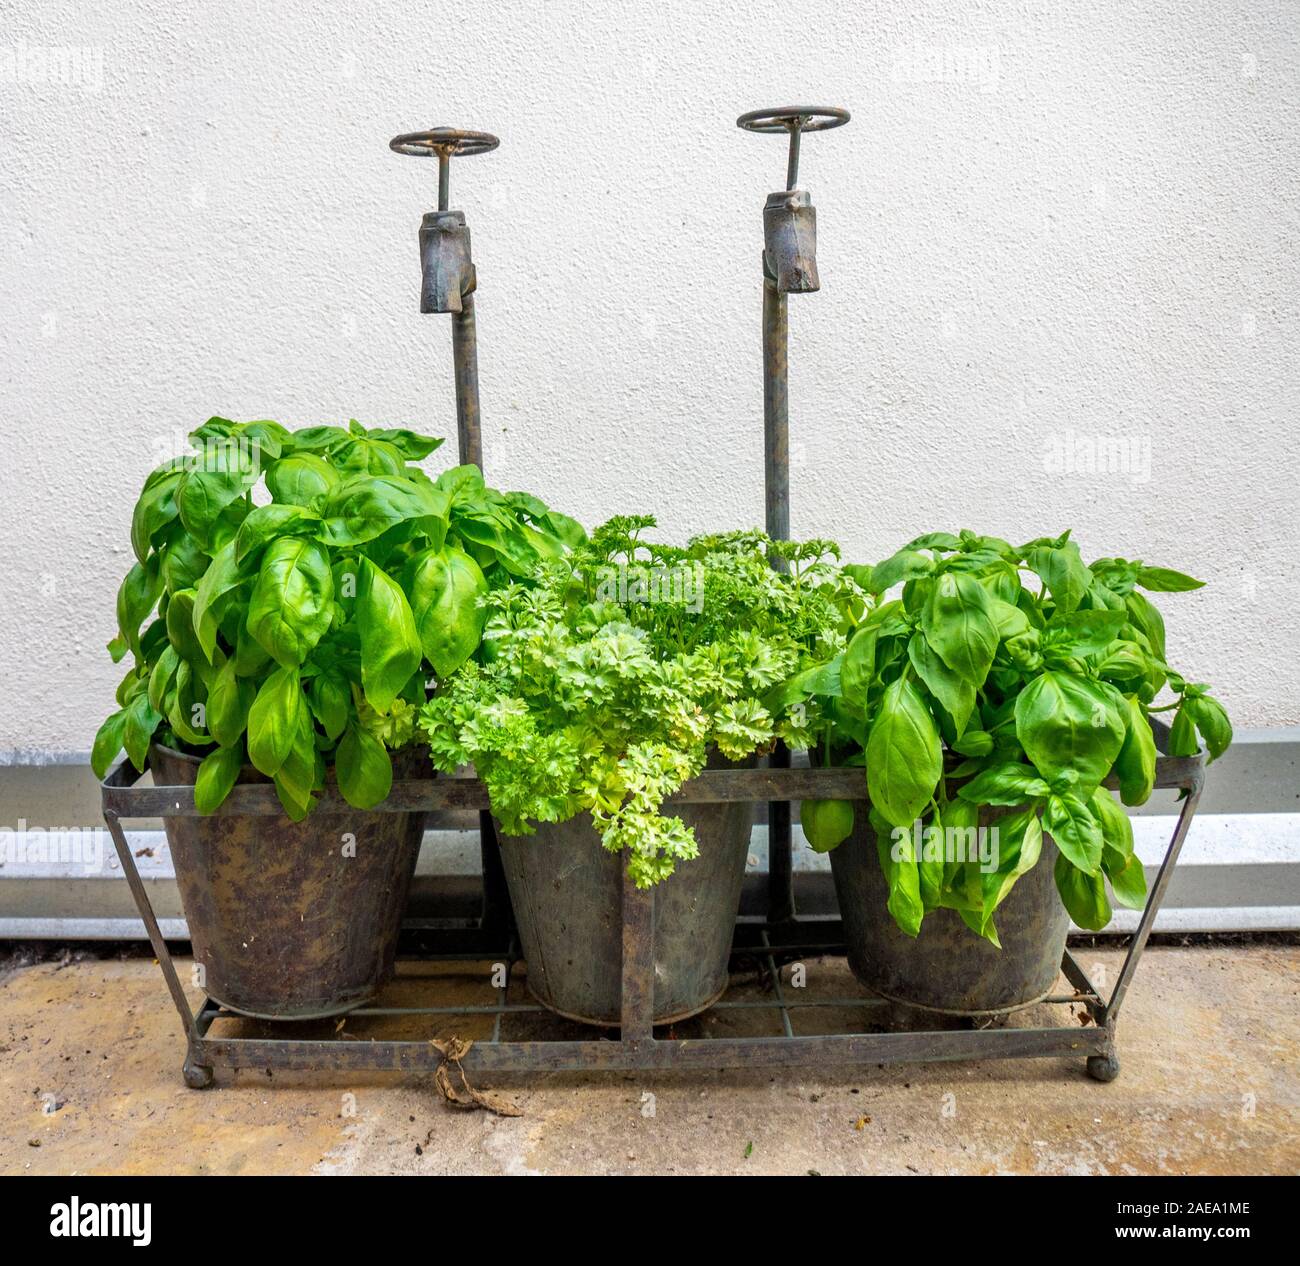 Three metal buckets with basil and parsley plants growing in them. Stock Photo